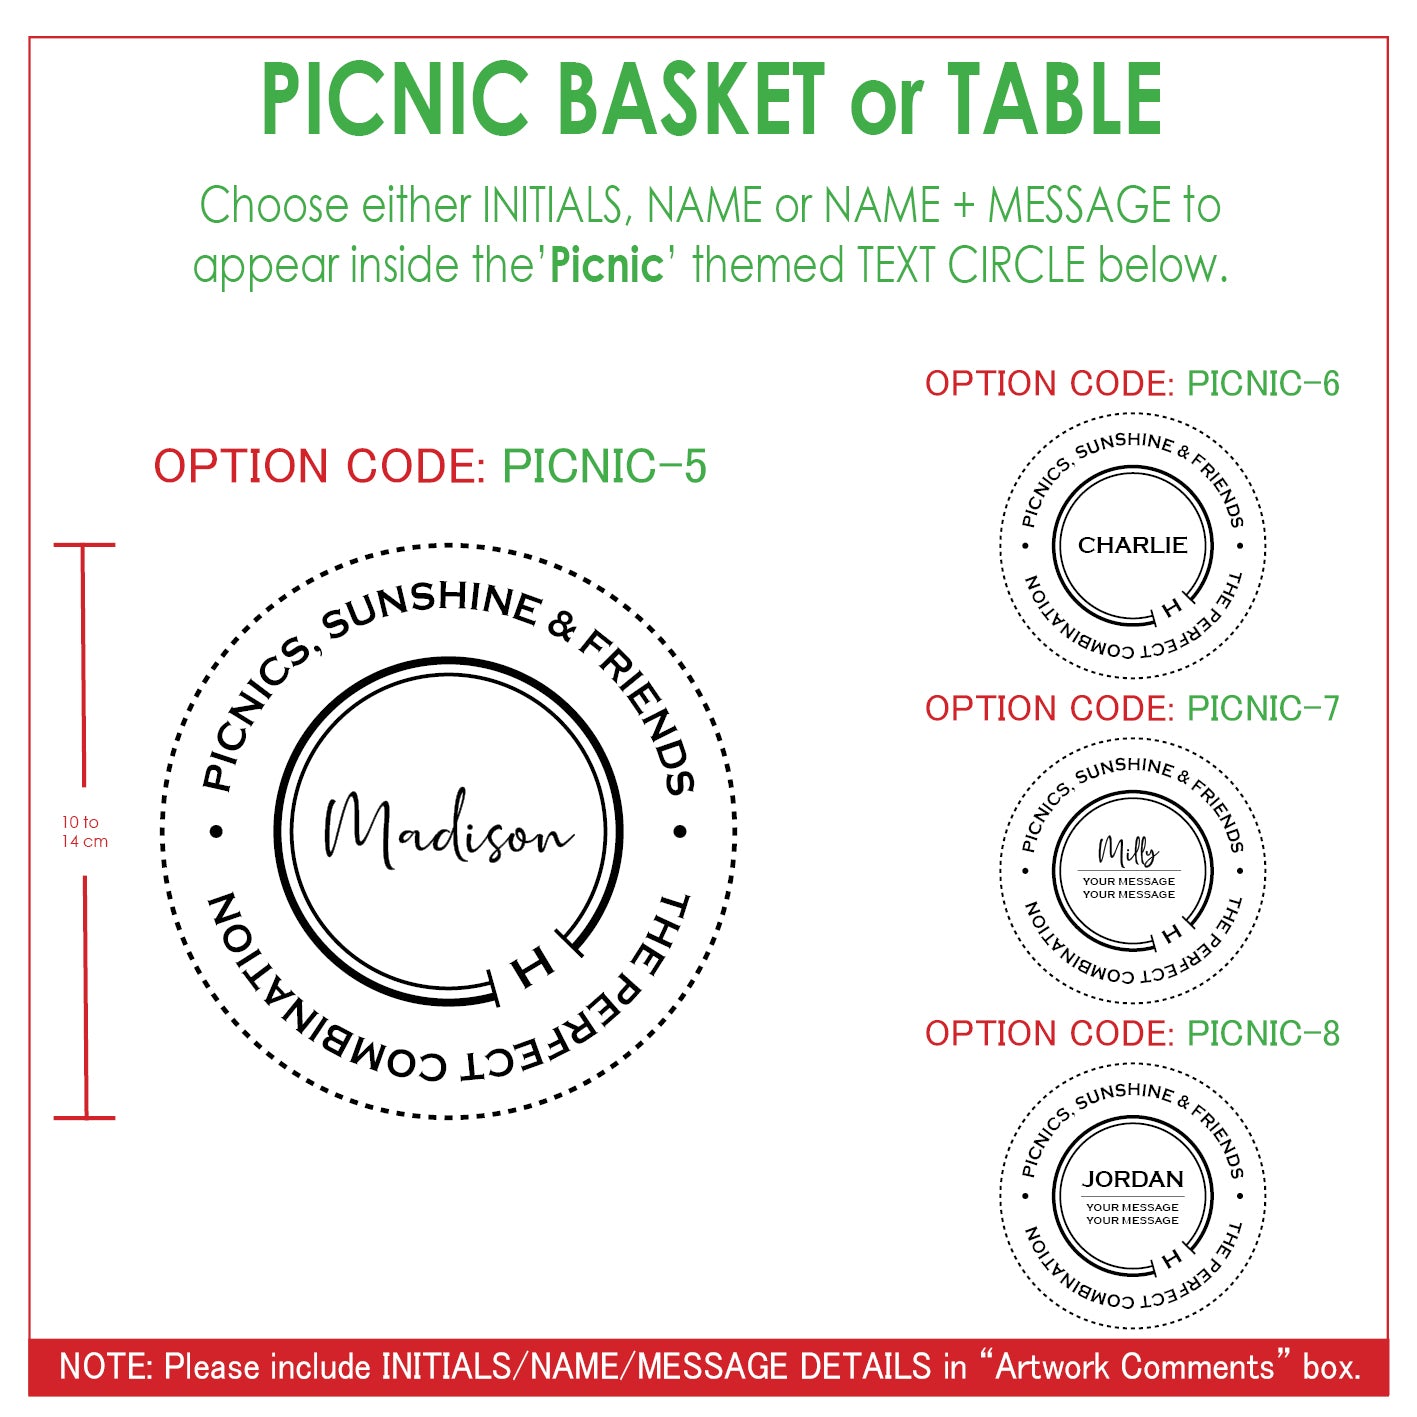 The Lakeside Picnic Table Set - With 2 Wine Glasses